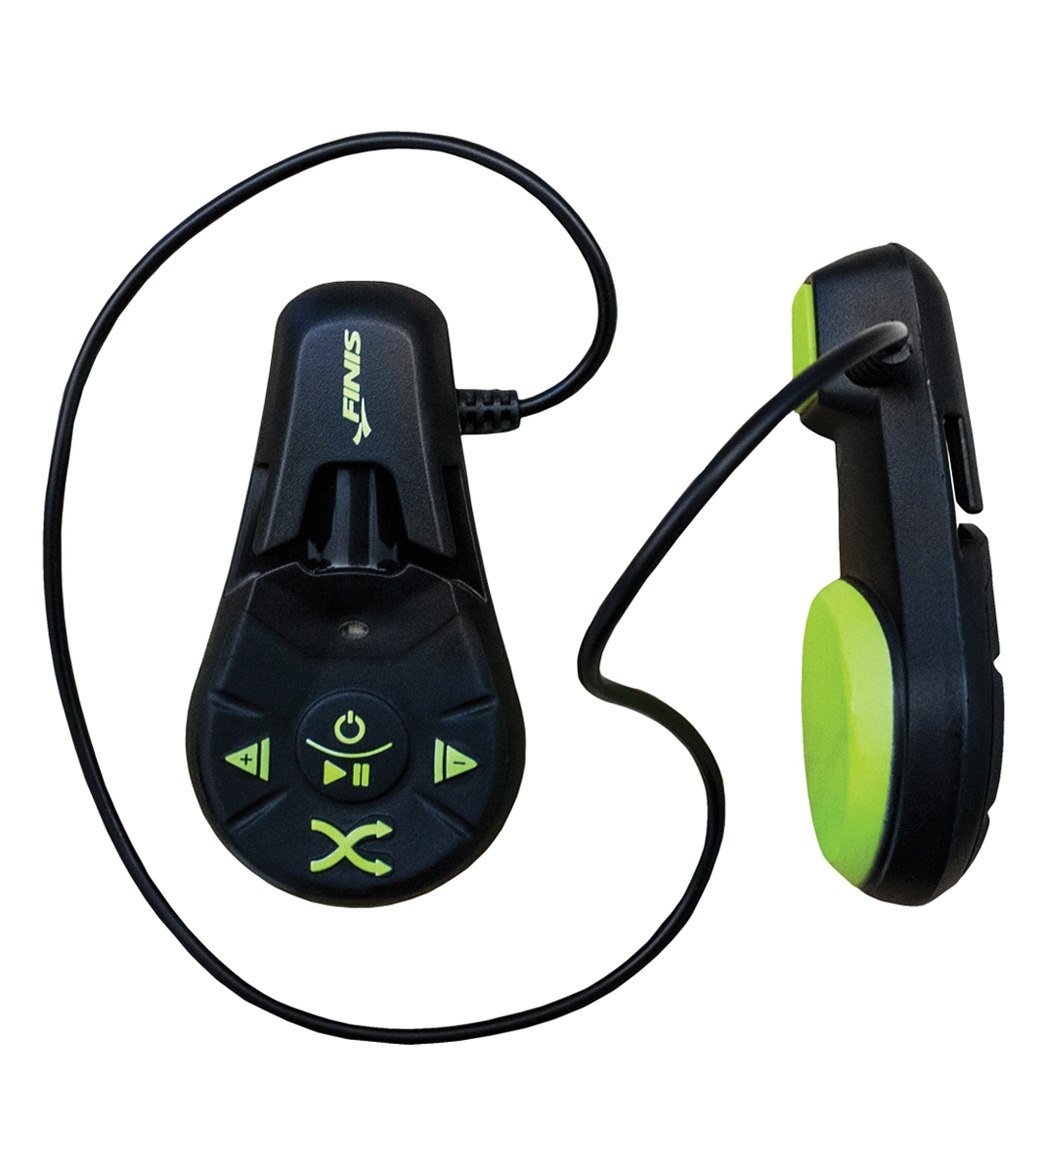 FINIS Duo Underwater Bone Conduction MP3 Player at SwimOutlet.com